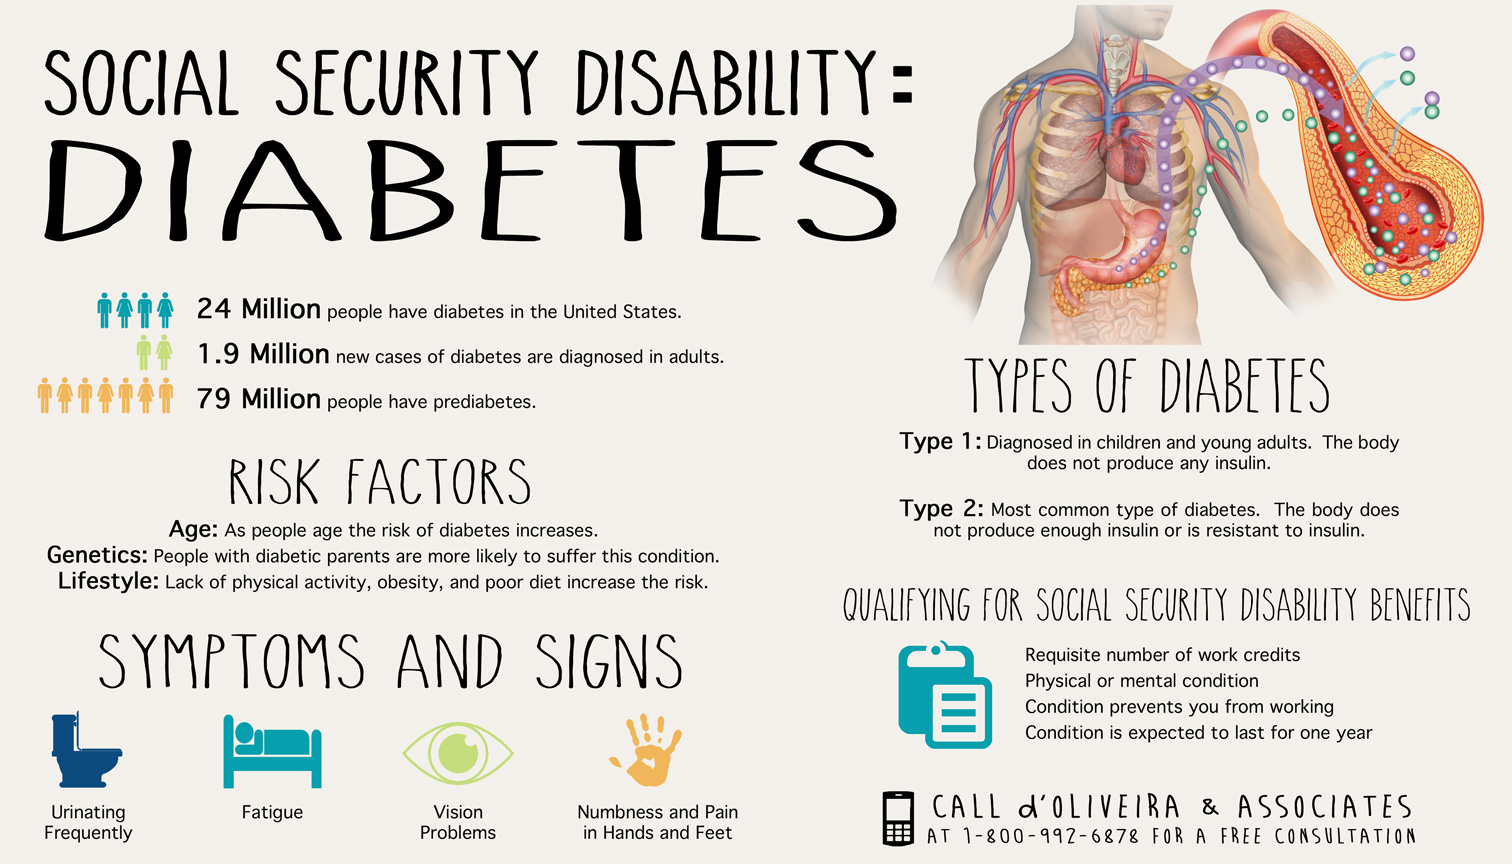 Diabetes and Social Security Disability Infographic